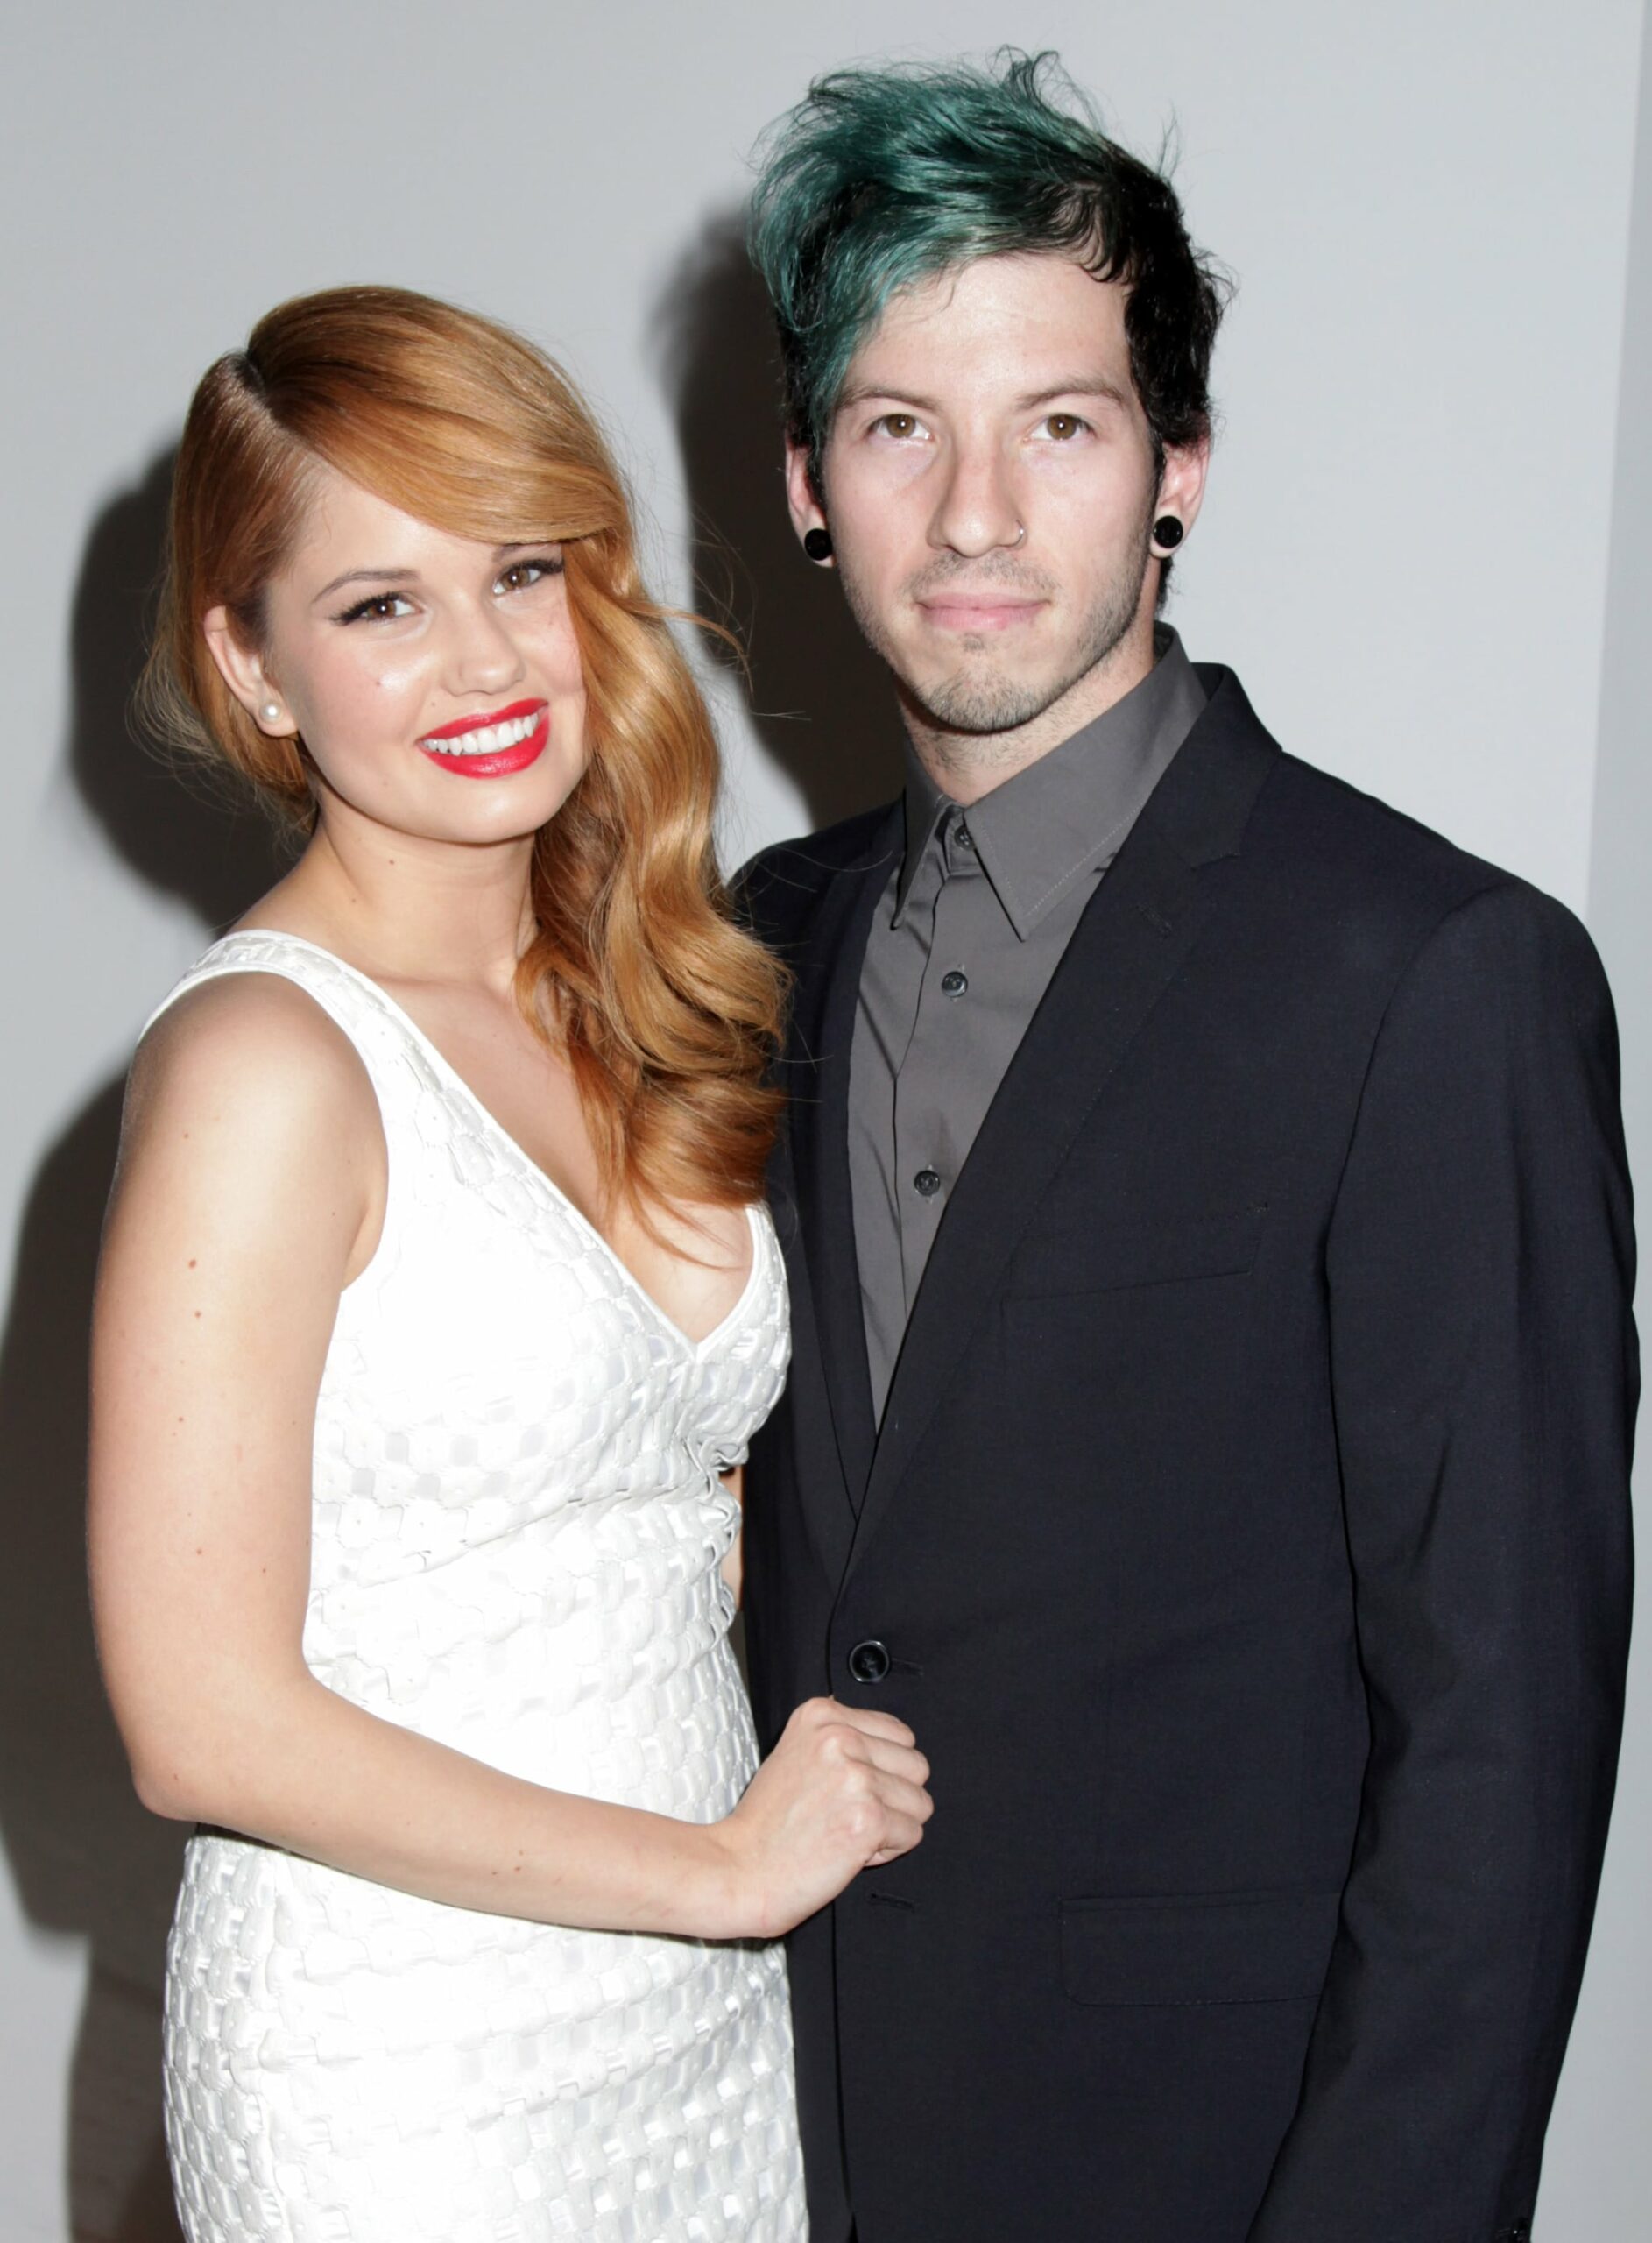 BEVERLY HILLS, CA - MARCH 18:  Actress Debby Ryan and musician Josh Dun arriving at the 2nd Annual Norma Jean Gala 2014 at The Paley Center for Media on March 18, 2014 in Beverly Hills, California.  (Photo by Paul Redmond/WireImage)